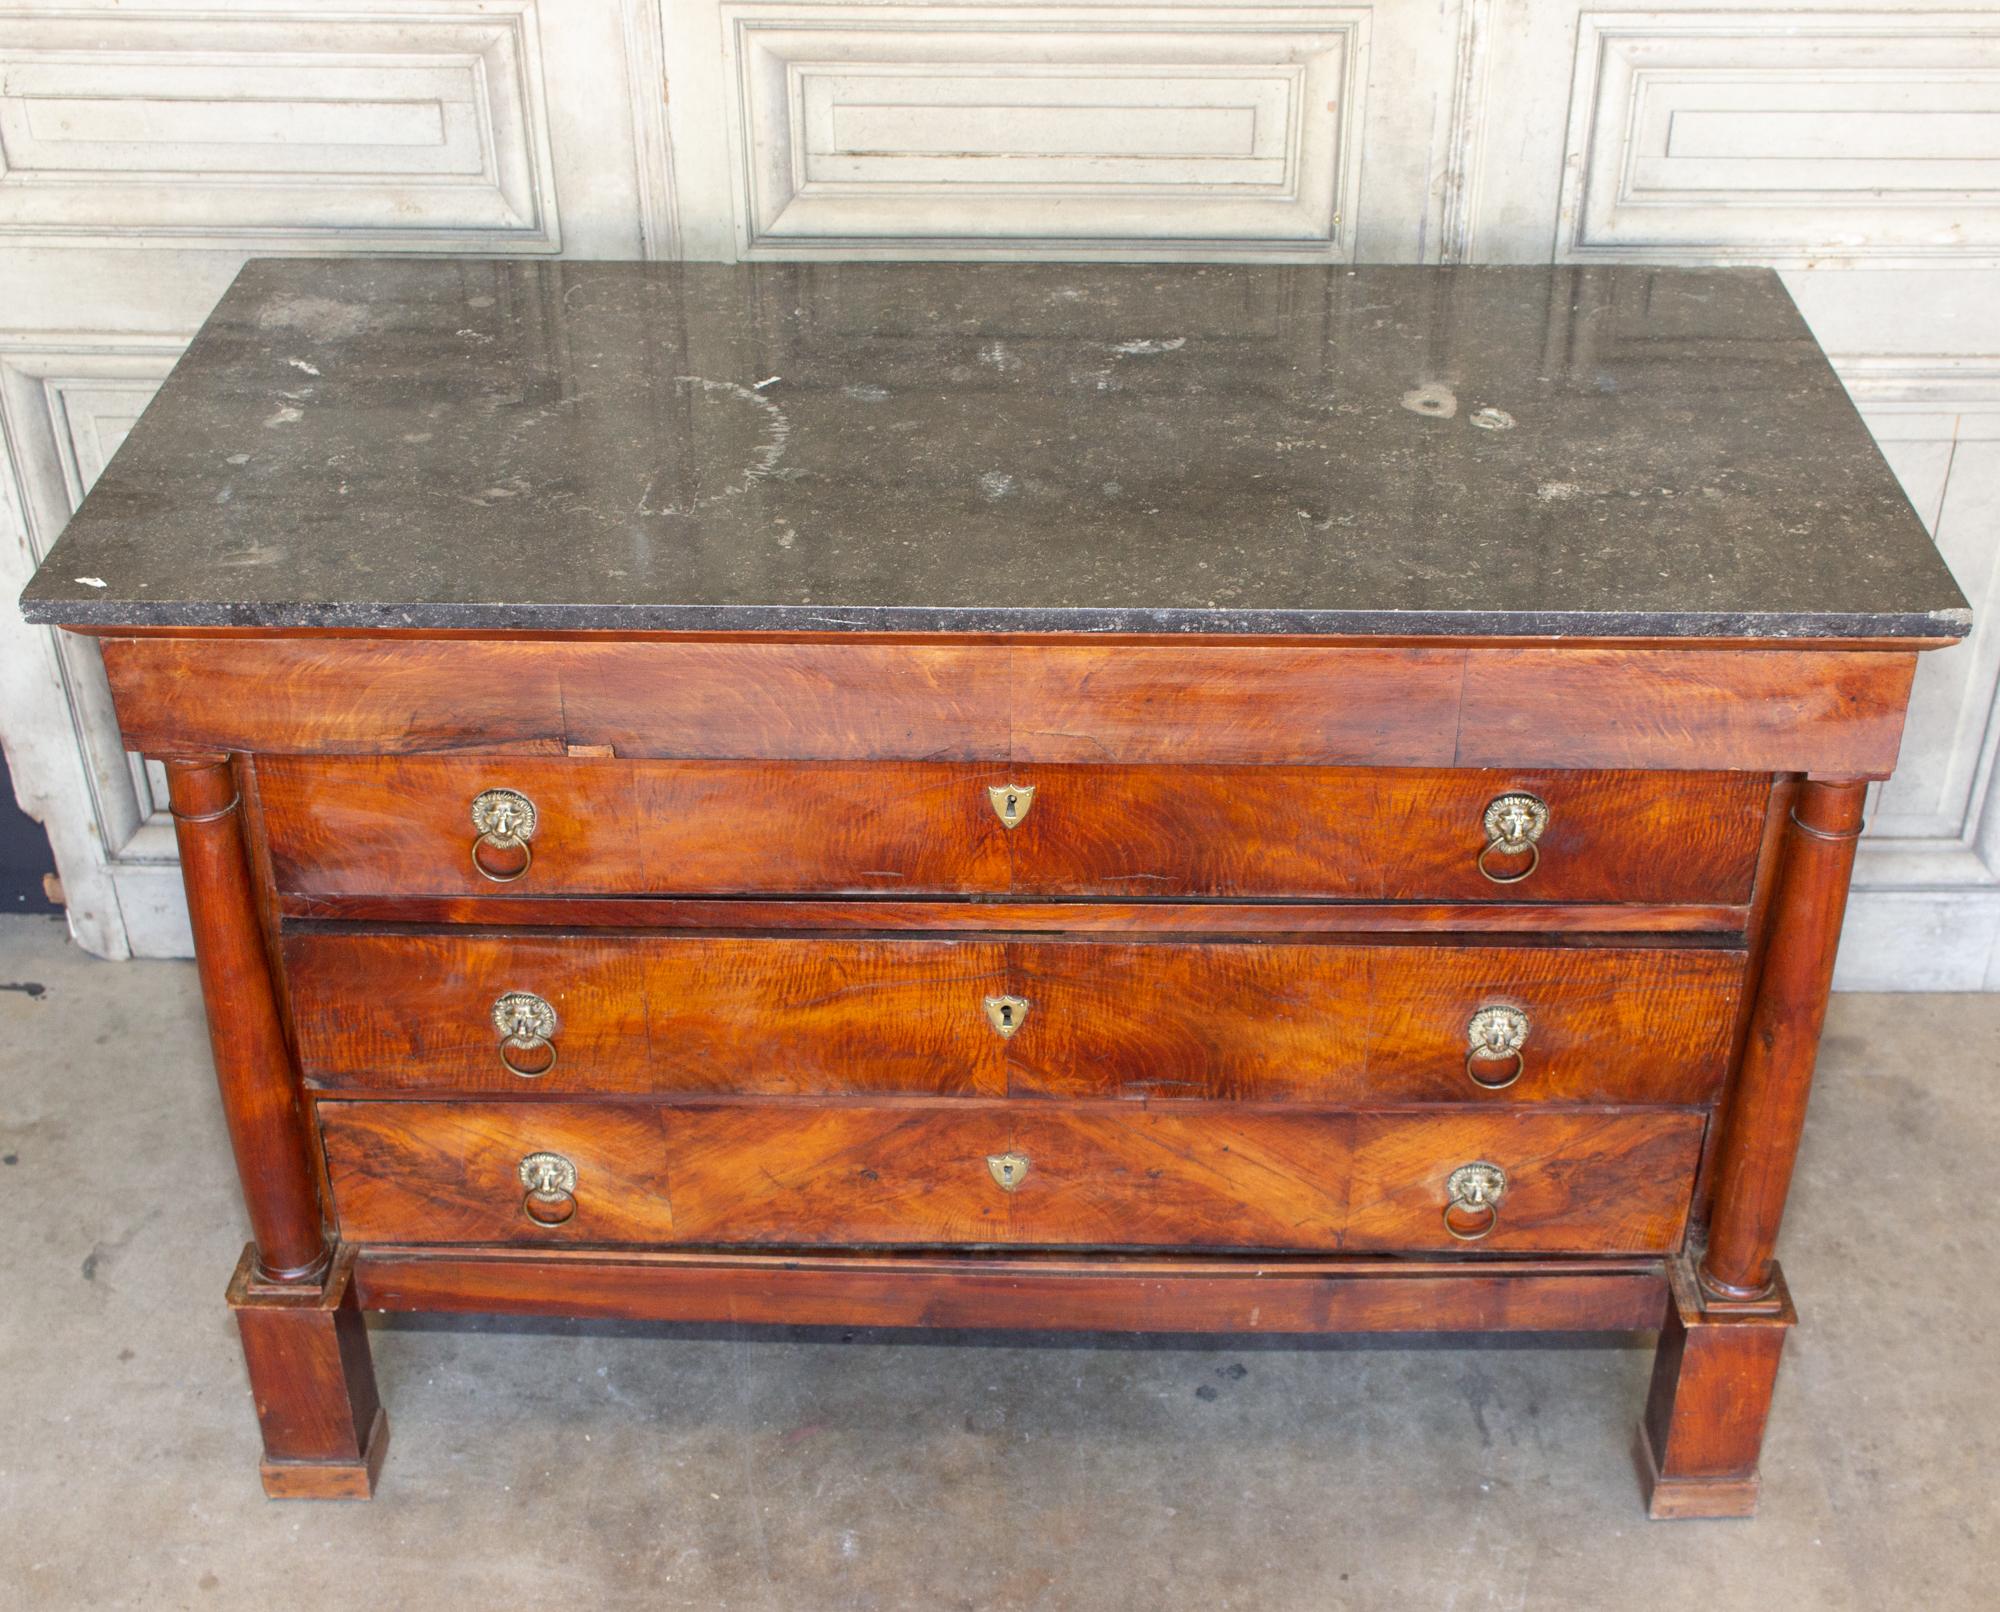 This antique French empire style chest features wonderful lion's head pulls and a fossilized marble top. The four-drawer design includes one narrow top drawer and three larger lower drawers. No key is included, but this piece does have shield-shaped